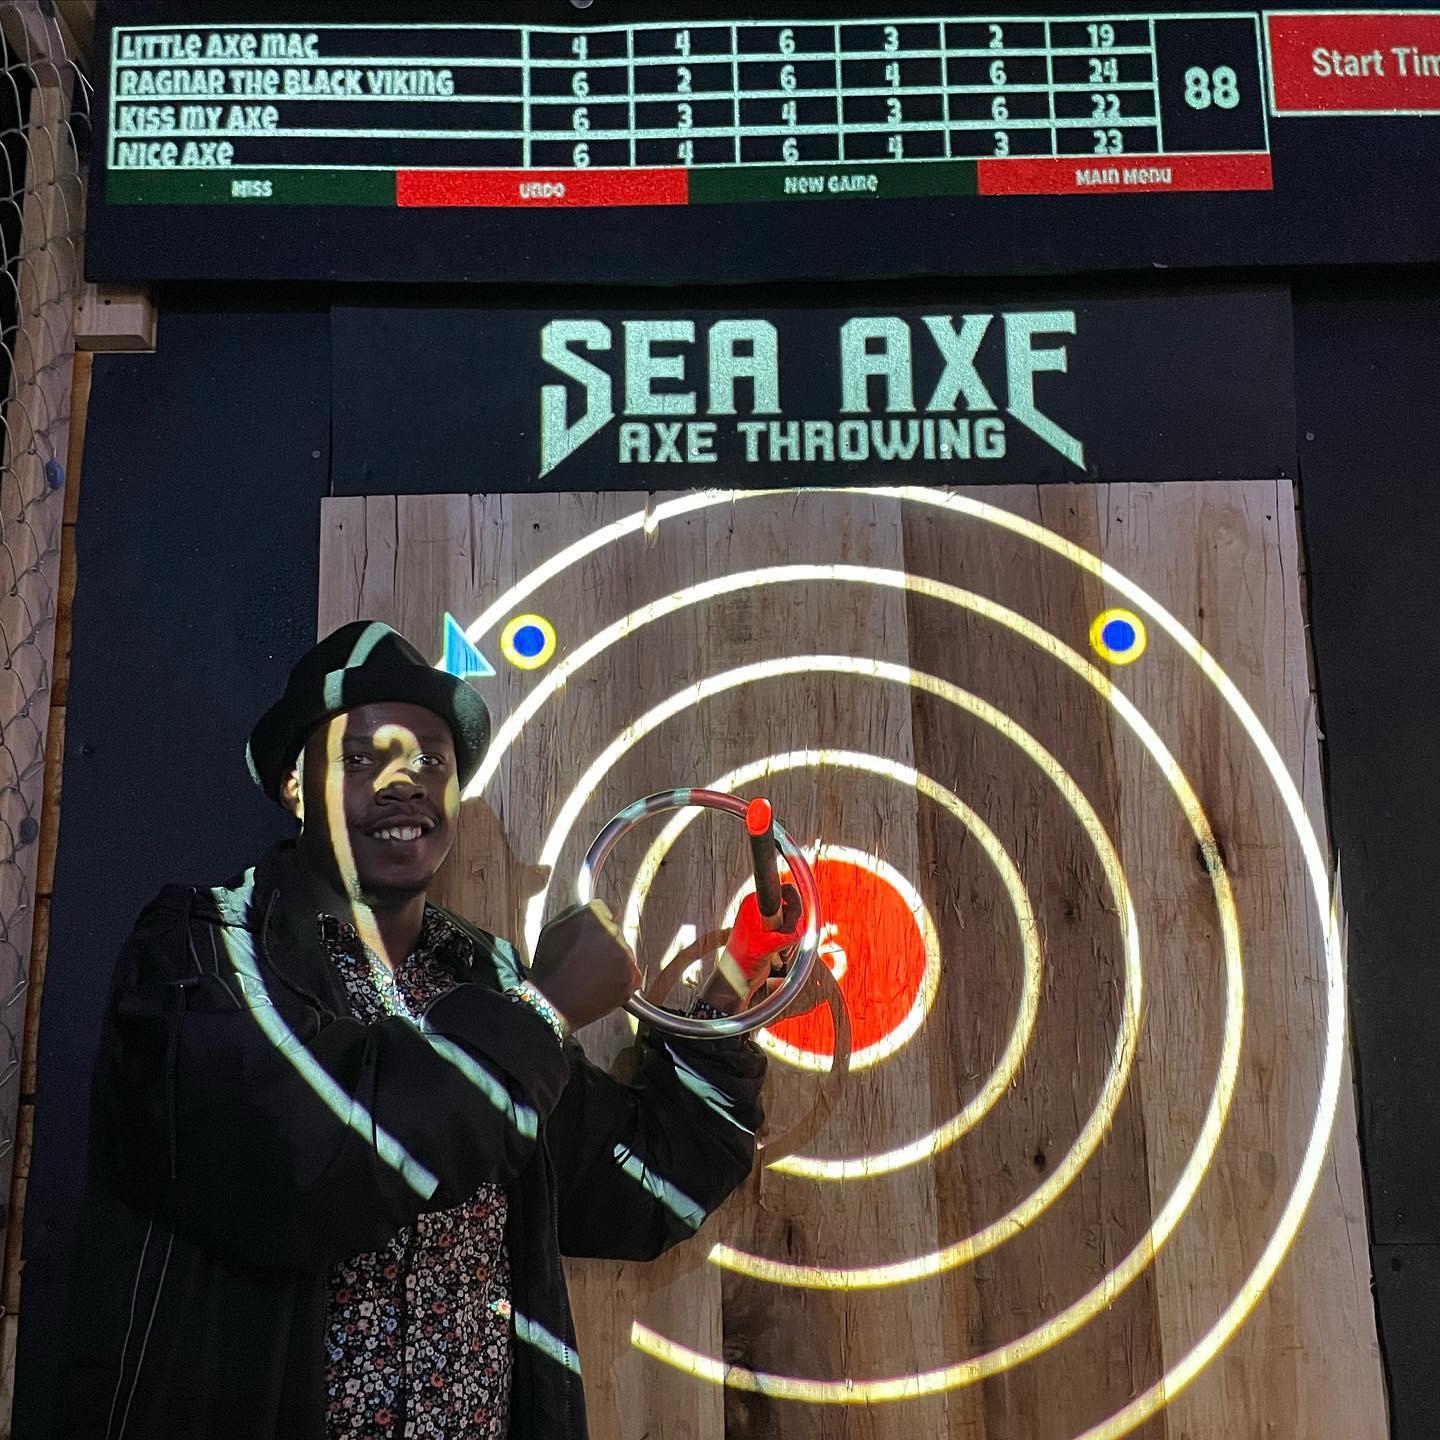 It's always a good day to throw some axes!  Book Now at Seaaxe.com! 